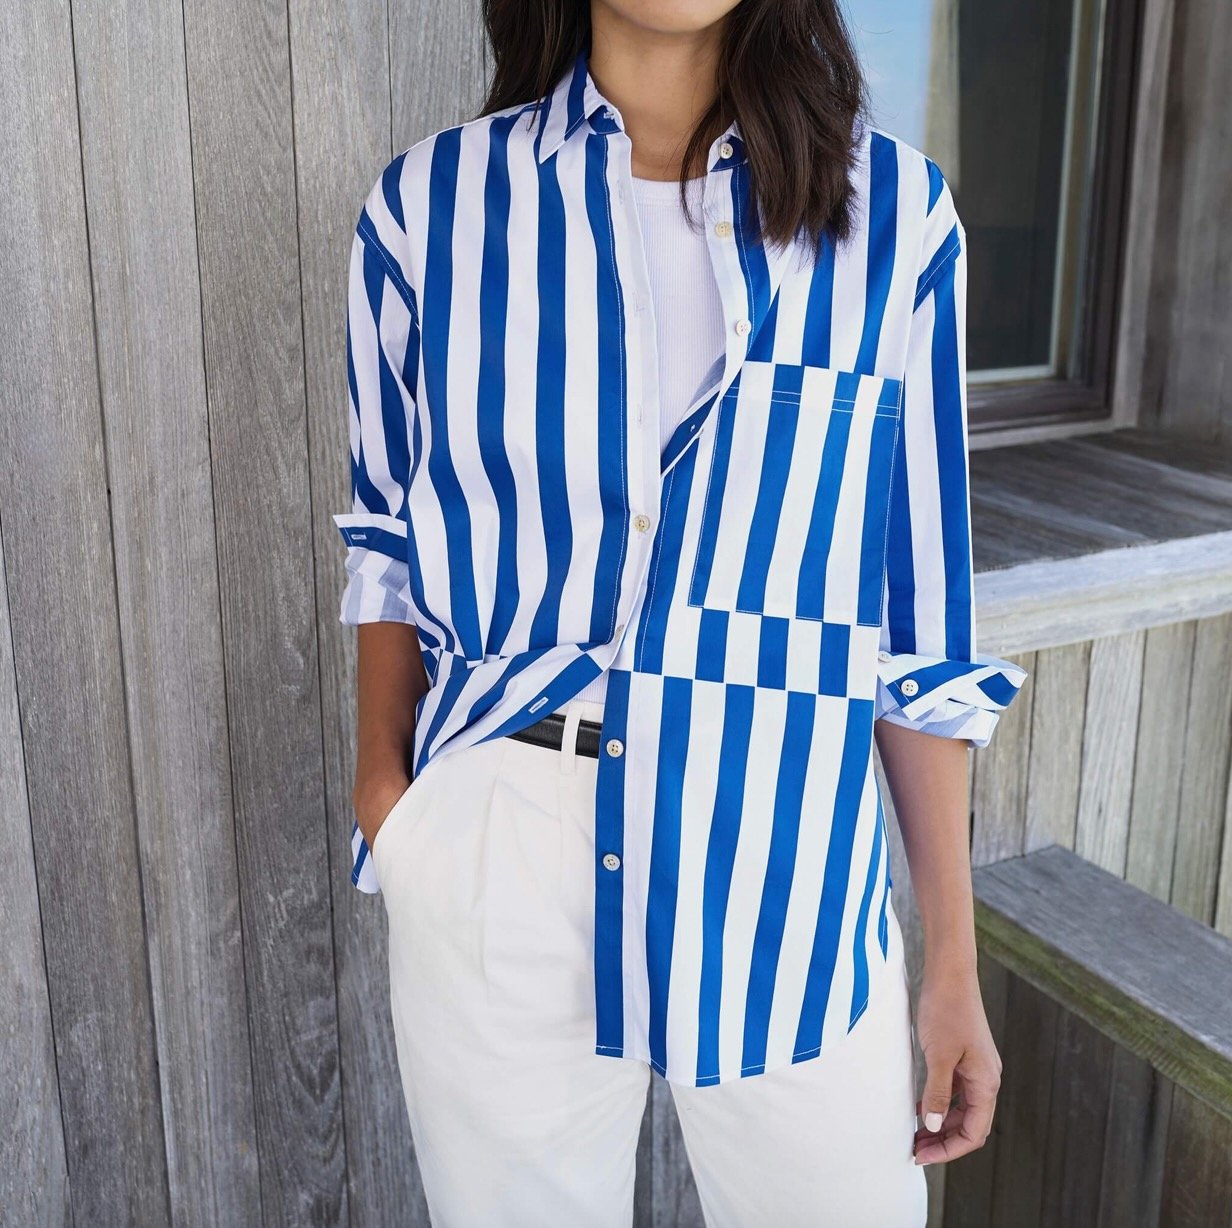 Six Striped Pieces I'd Love to Wear All Fall